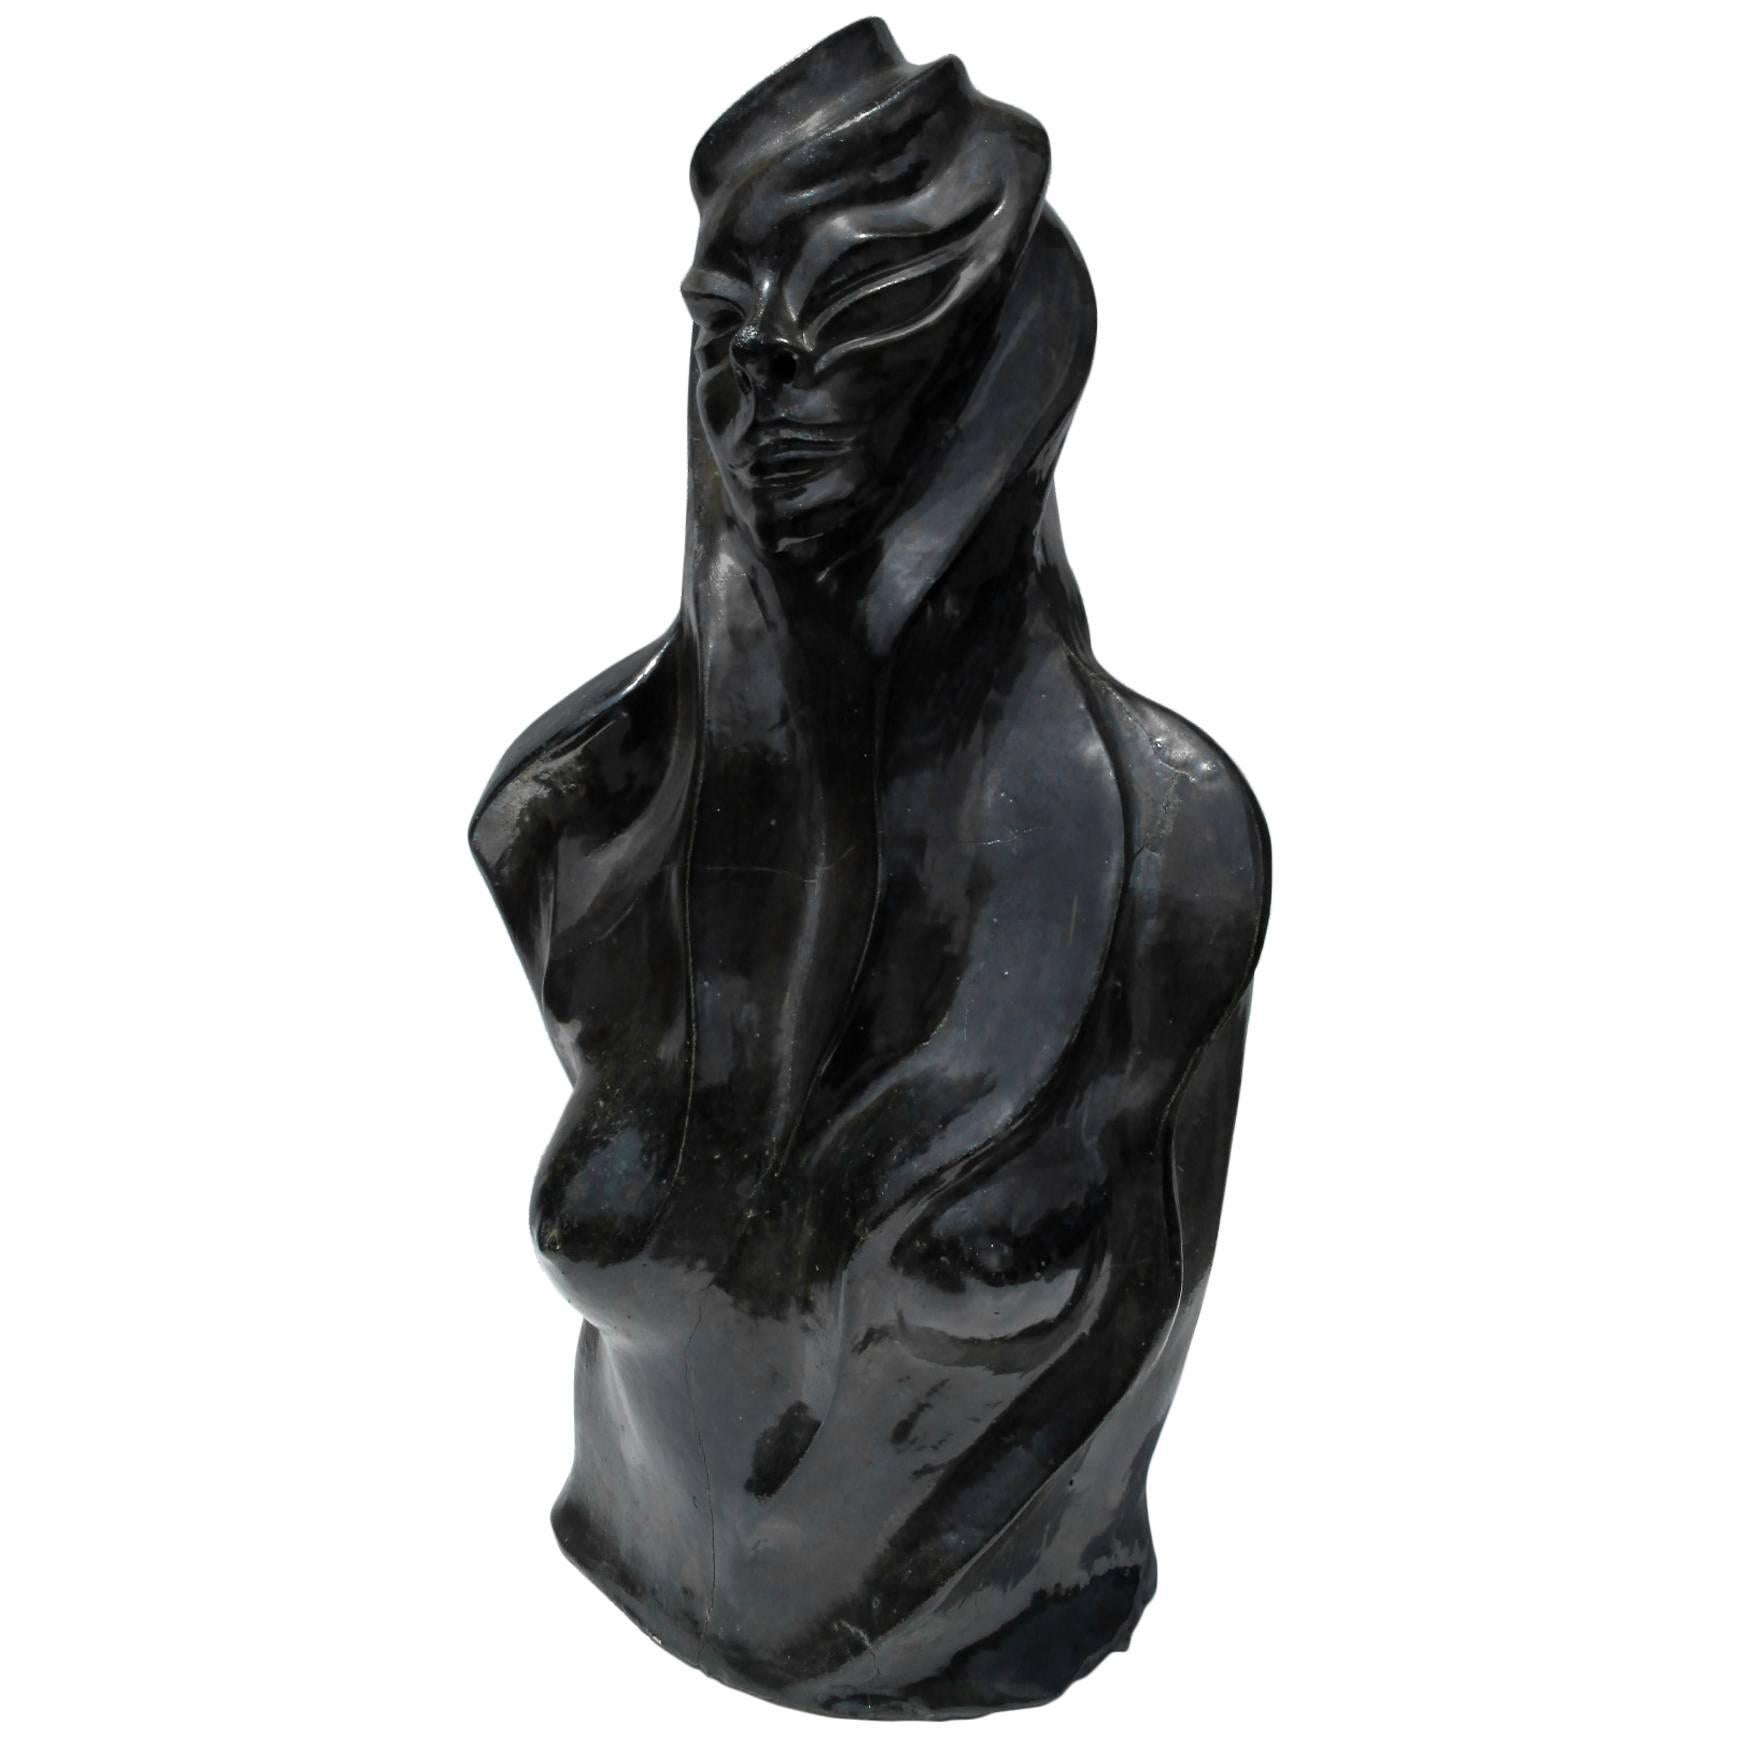 Strong Ceramic Sculpture of Female Bust